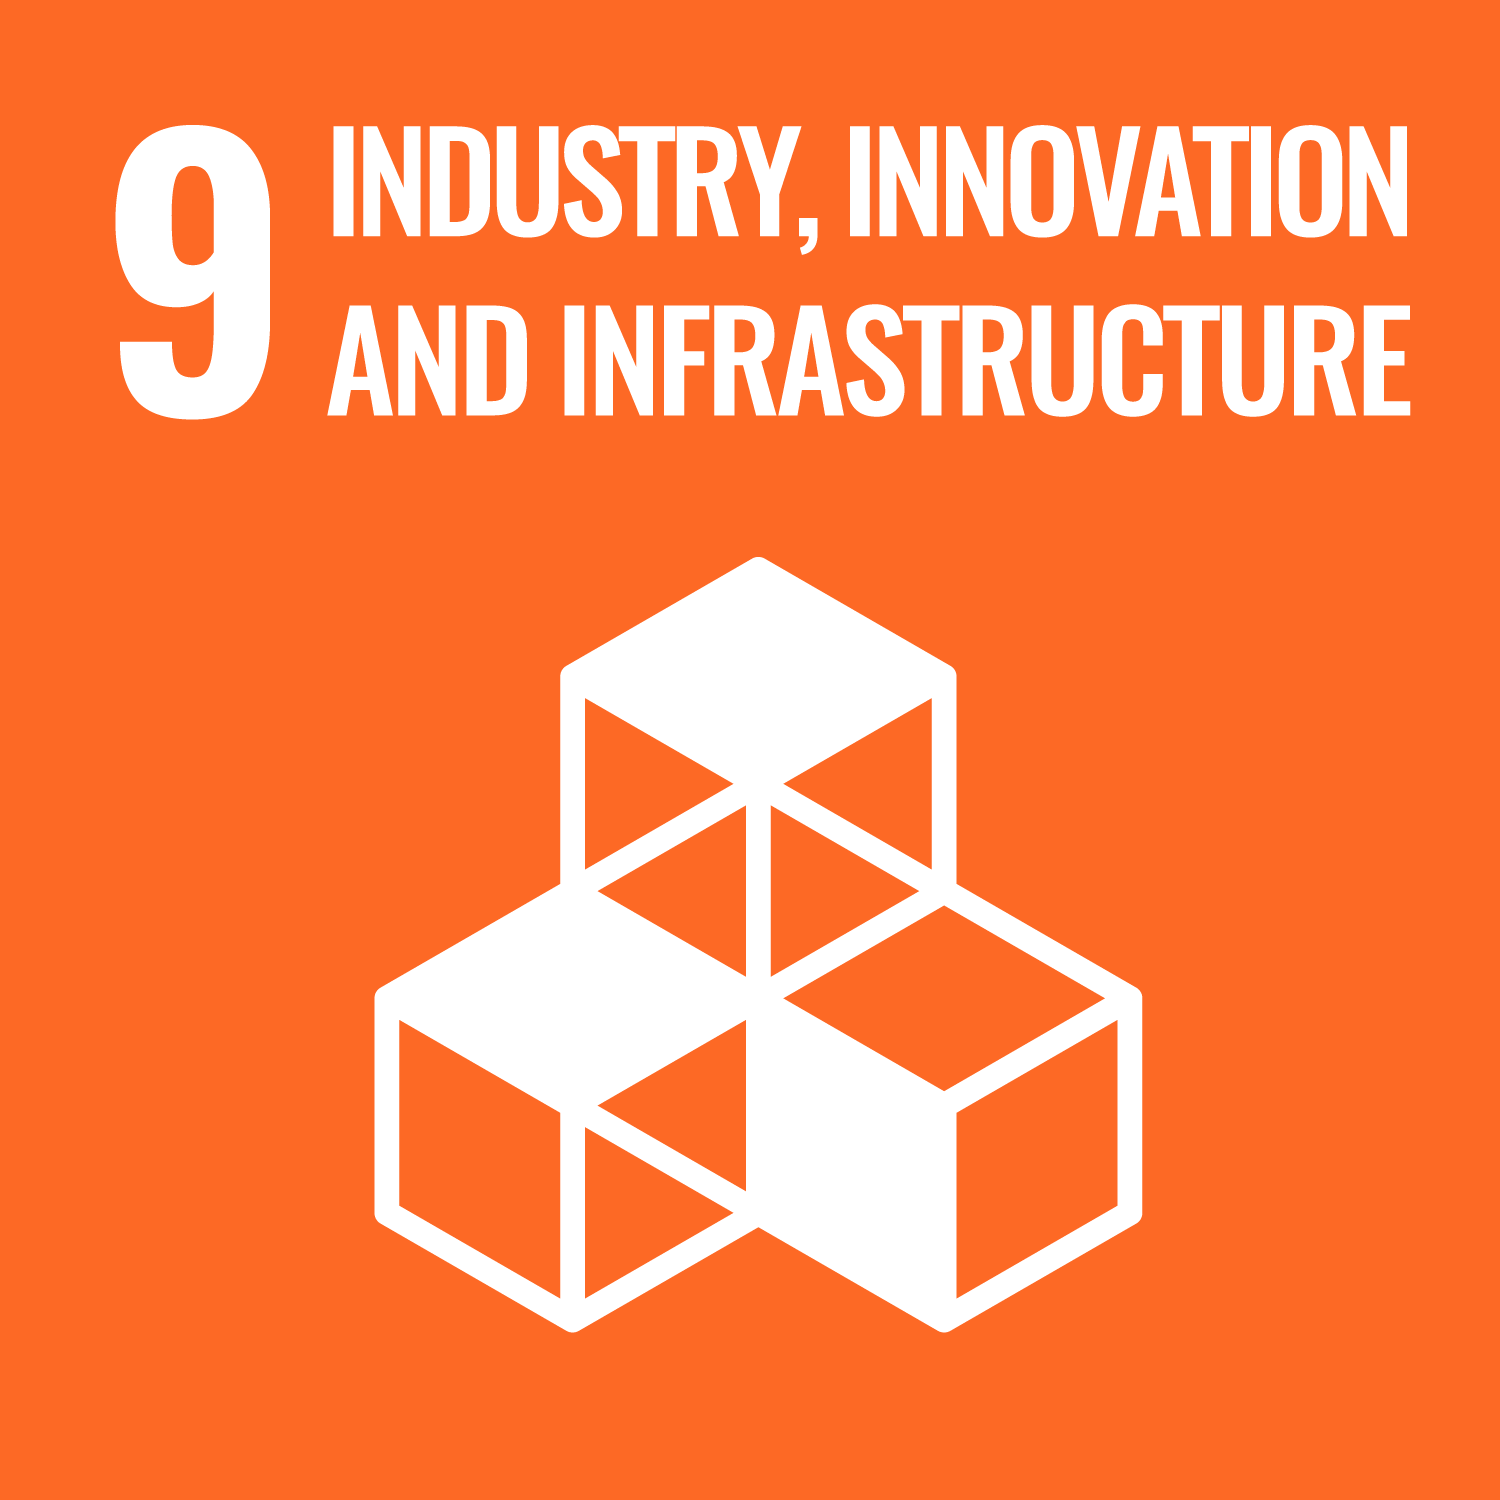 UNSG - Industry, Innovation and Infrastructure